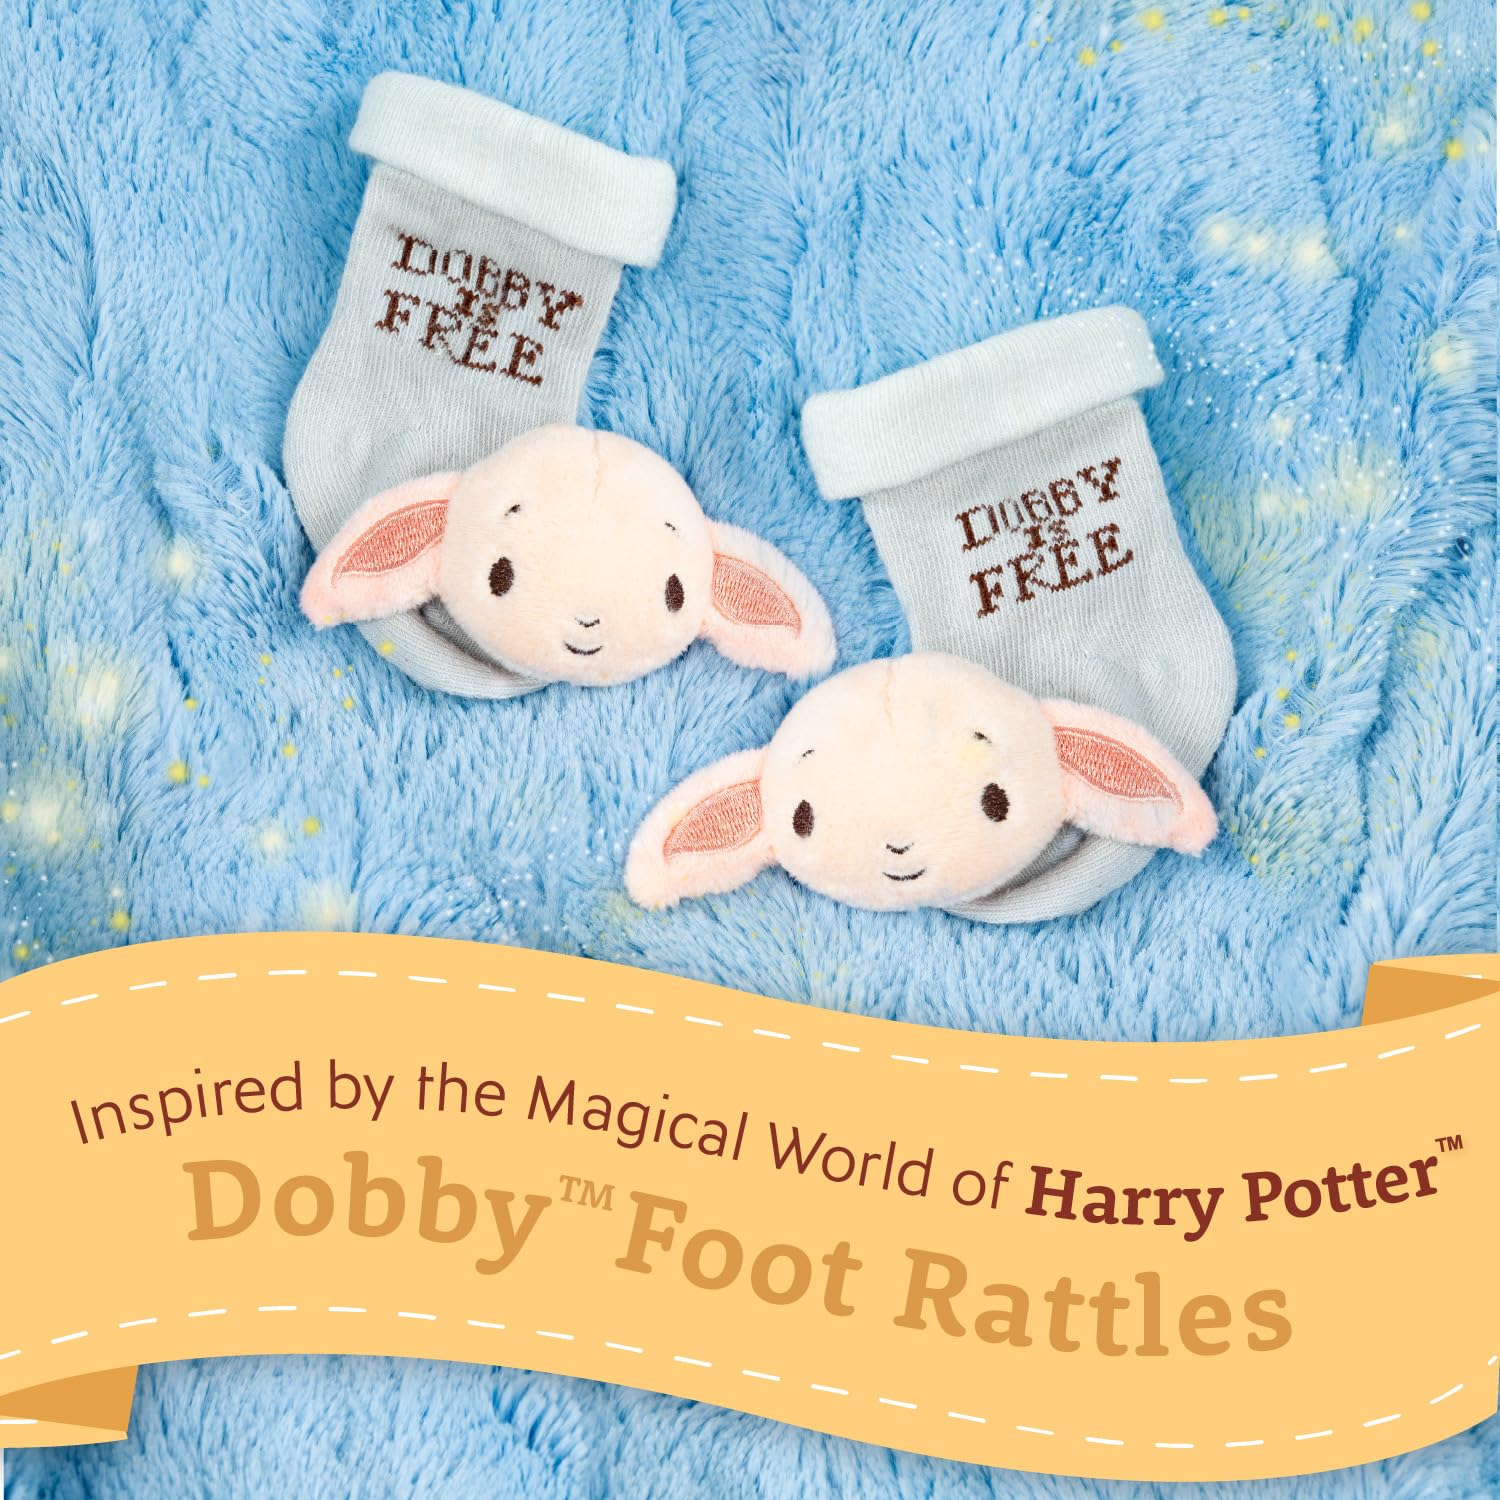 Kids Preferred Harry Potter Dobby Baby Infant Rattle Socks with Dobby Plush Rattle and Dobby is Free - Soft Baby Sock Feet Rattles Encourage Leaning Development Newborn to 9 Months